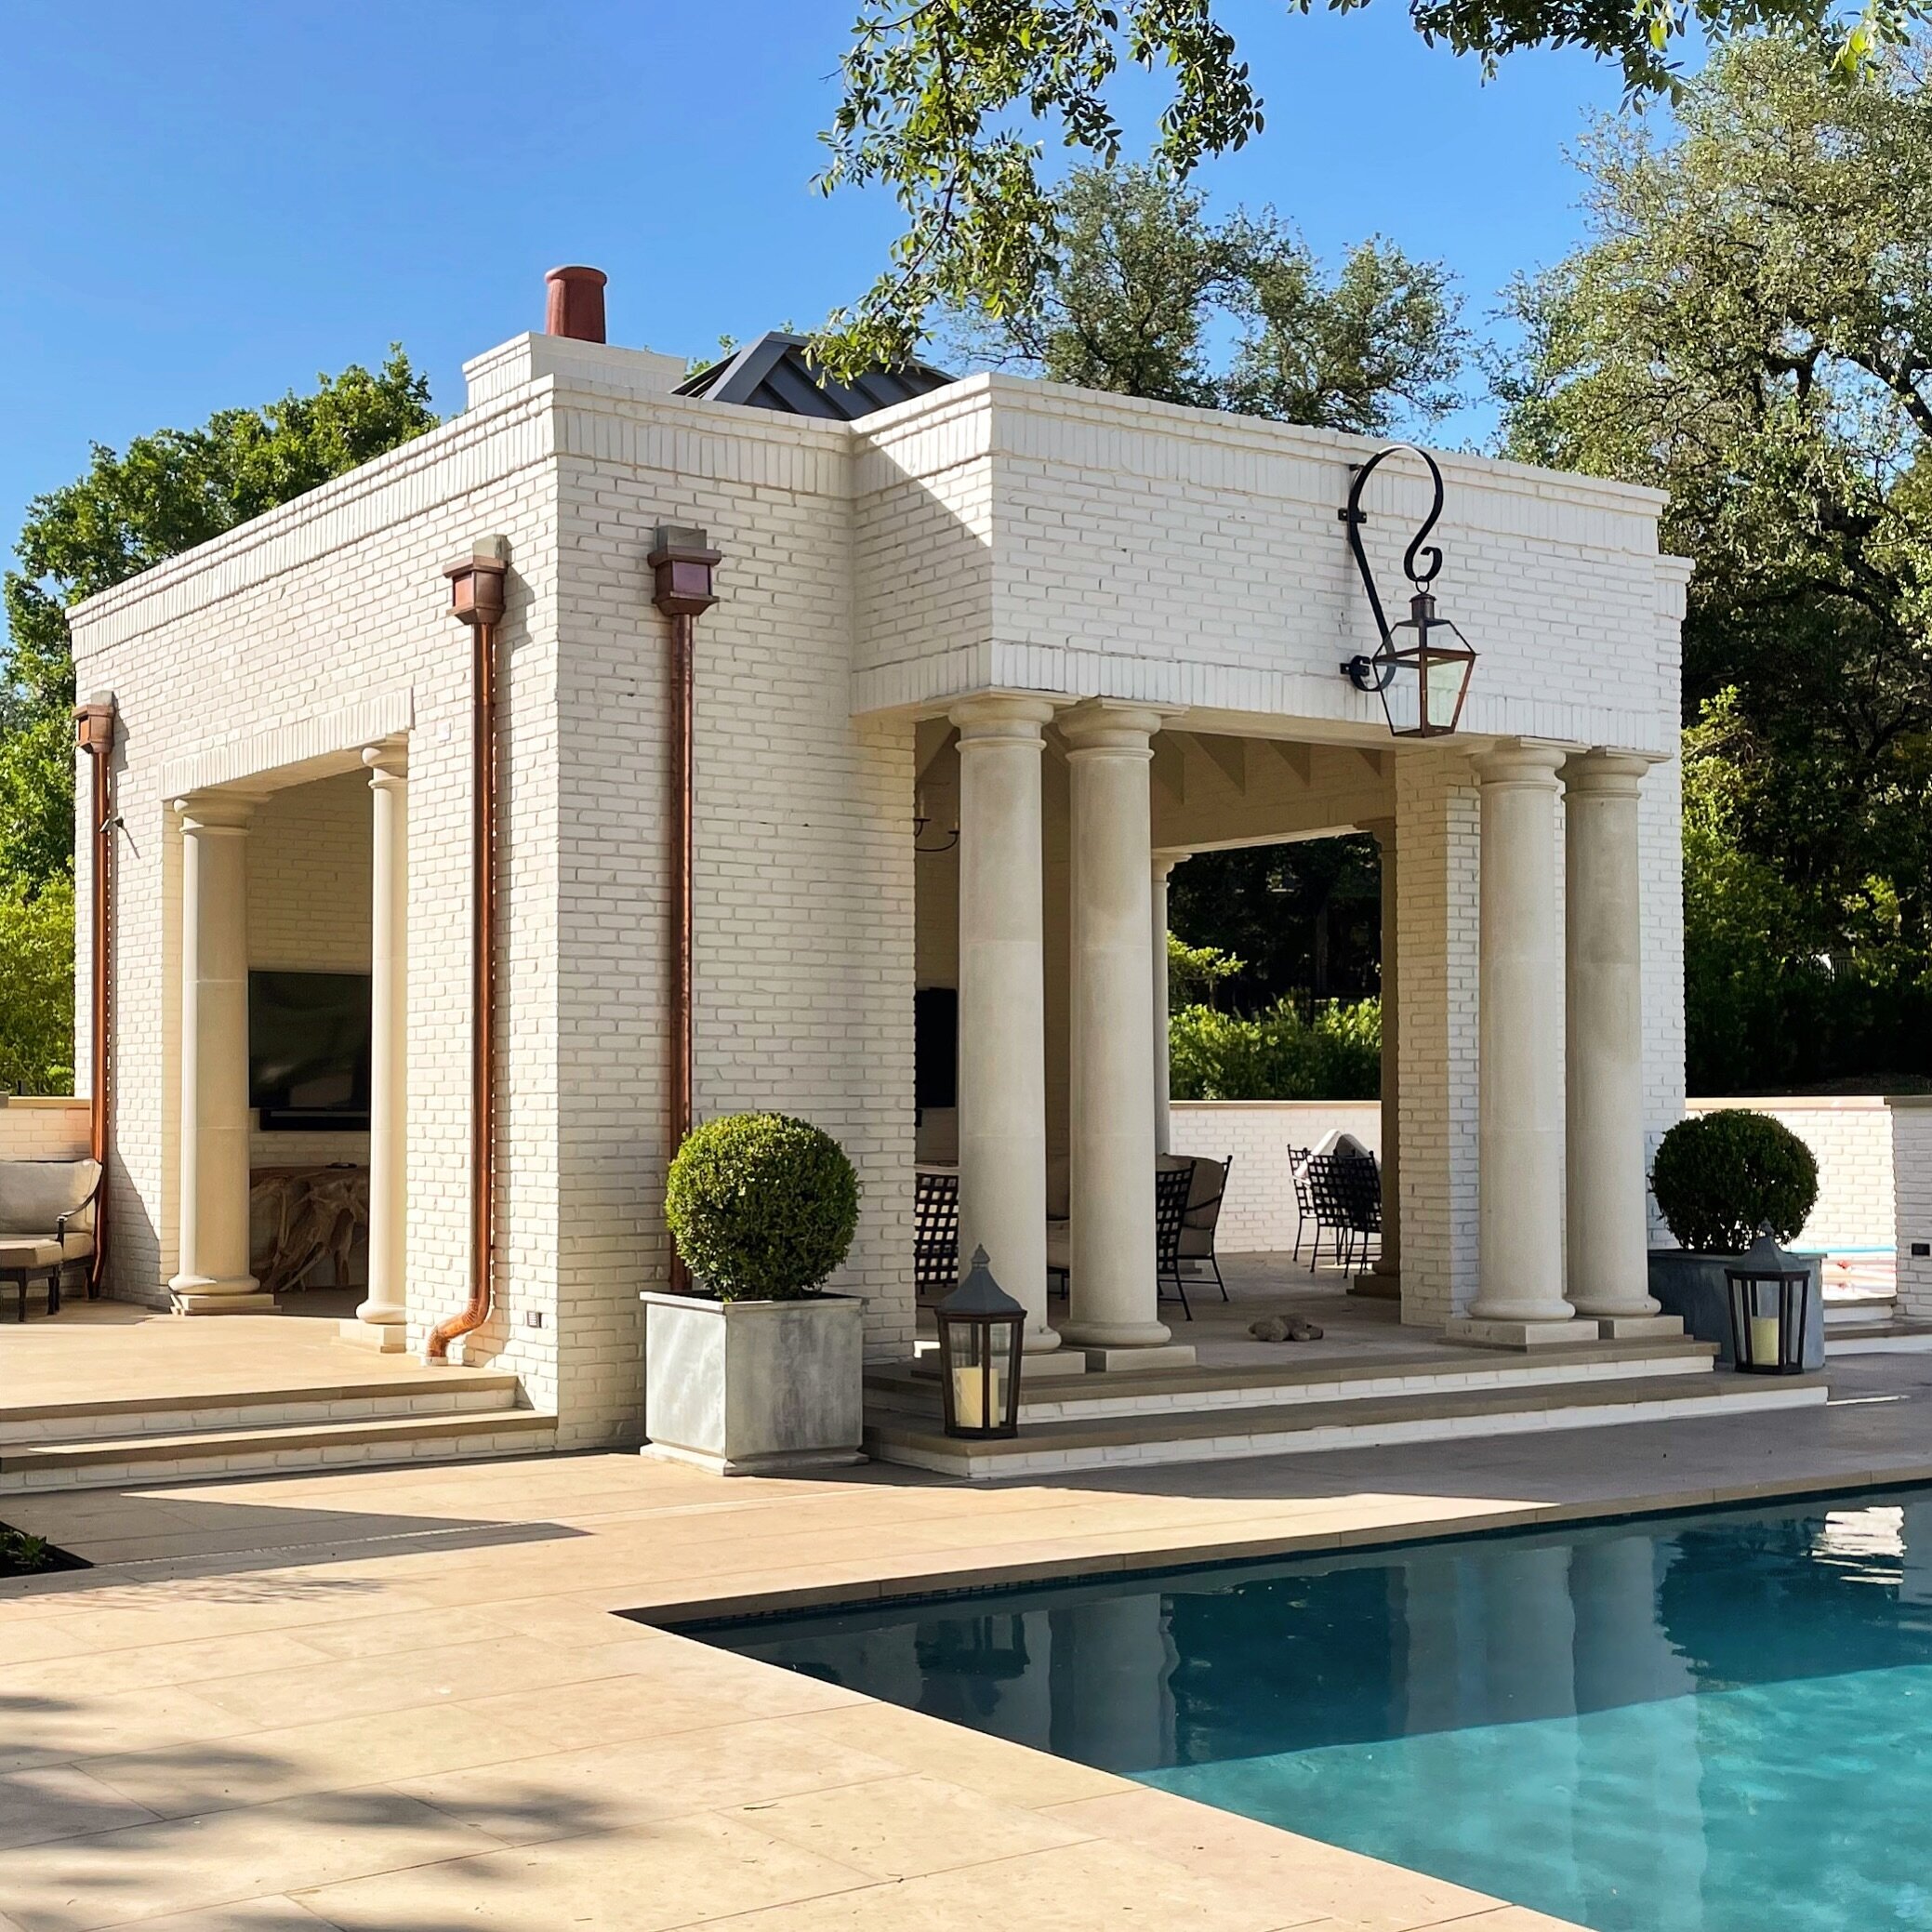 Who&rsquo;s ready for a margarita by the pool? 
Memory lane with @tsb_architecture&rsquo;s post yesterday &mdash; @davidbaker_tsb really knows how to design a pool house.  This one was part of a recent project in Austin and was perfection. 
Architect